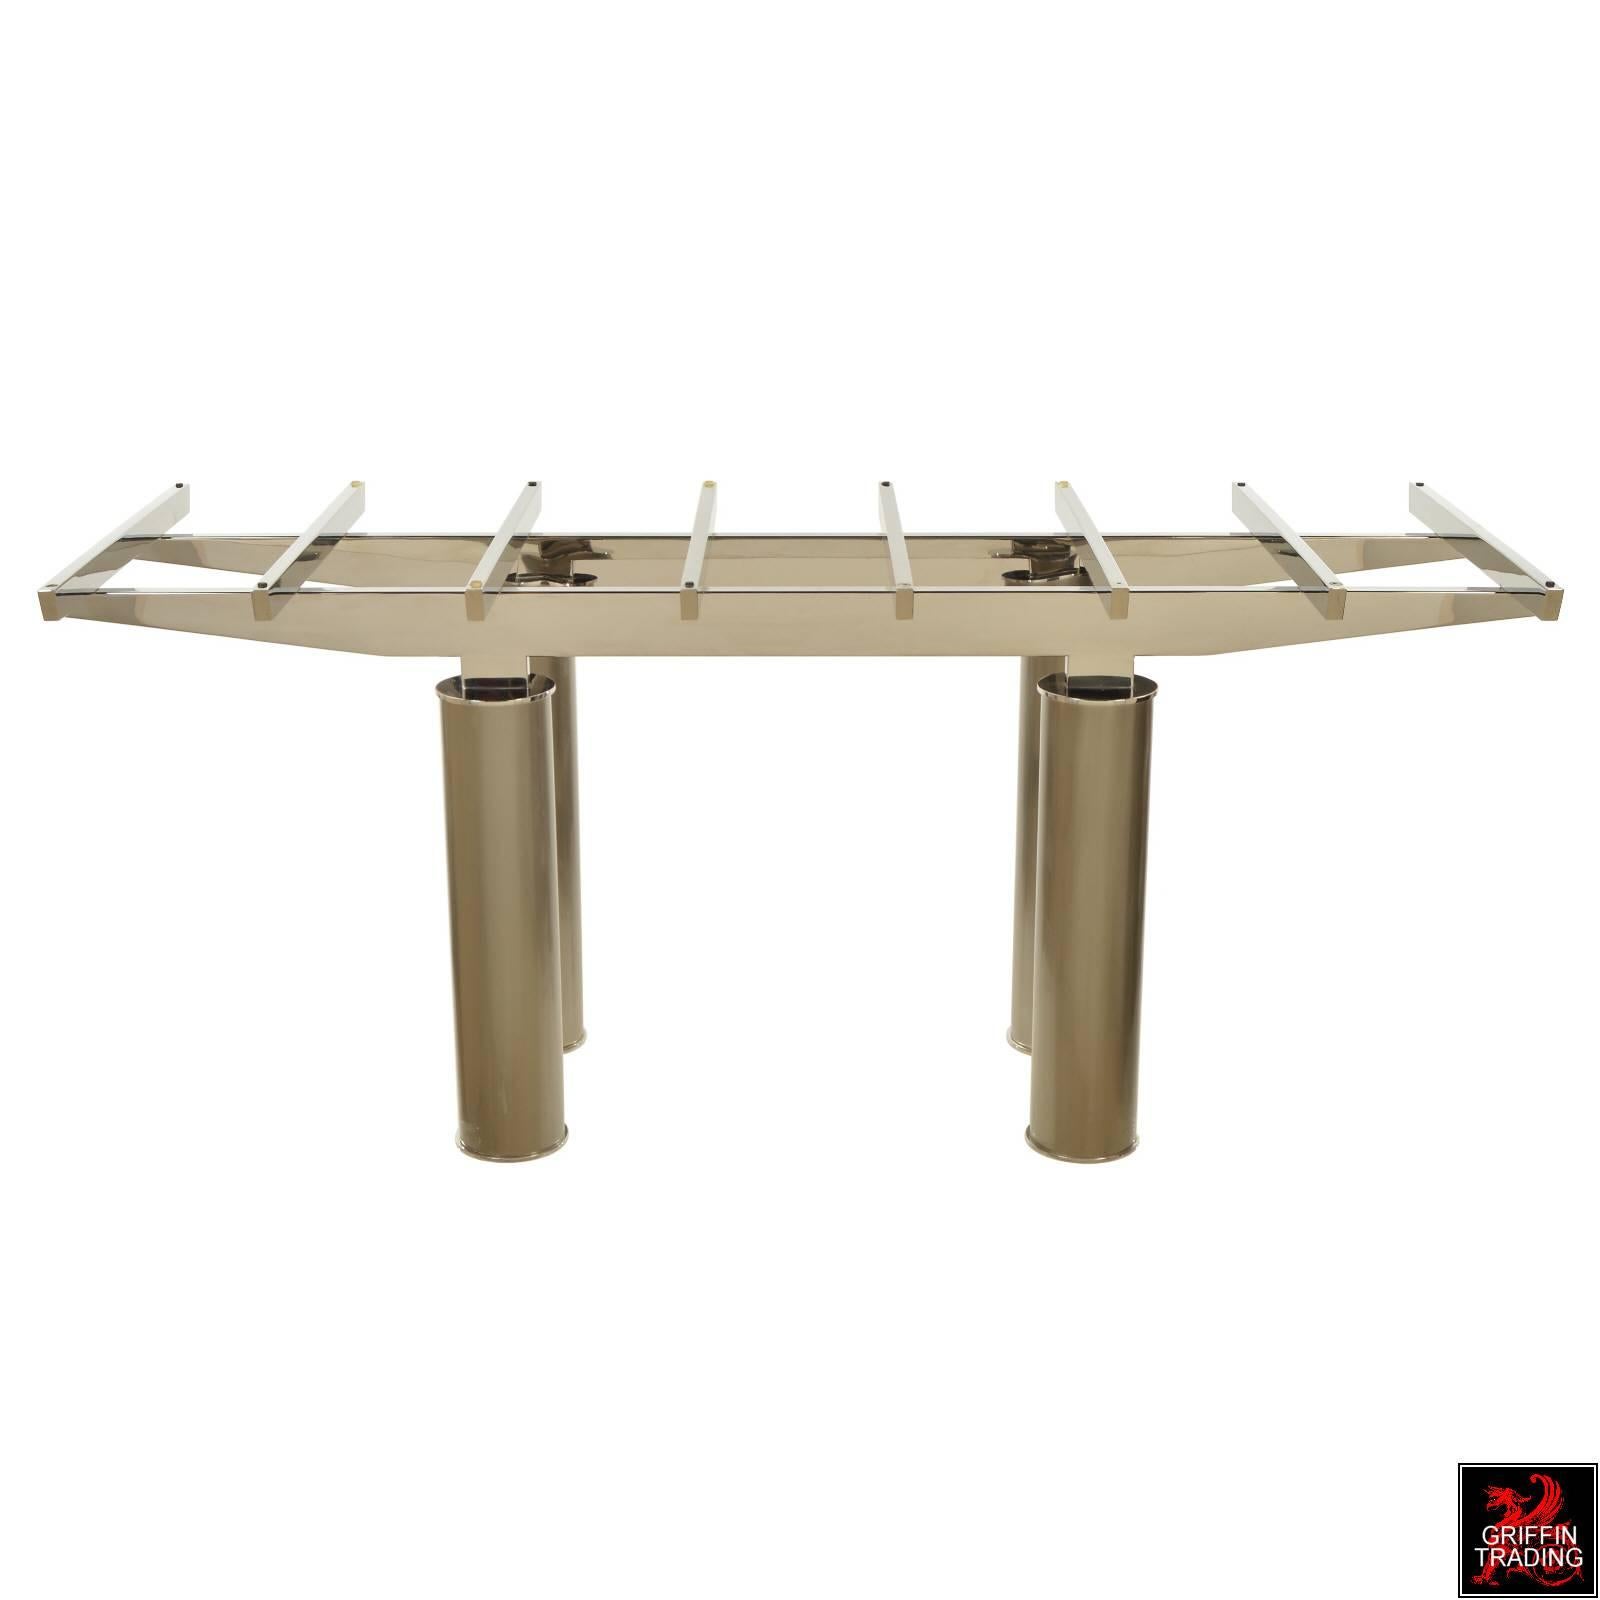 This elegant dining table has an impressive structural design in chrome, that rest on four large pillar legs in brushed metal. The large glass tabletop and striking combination of metals adds to the tables distinctive appearance. The table was